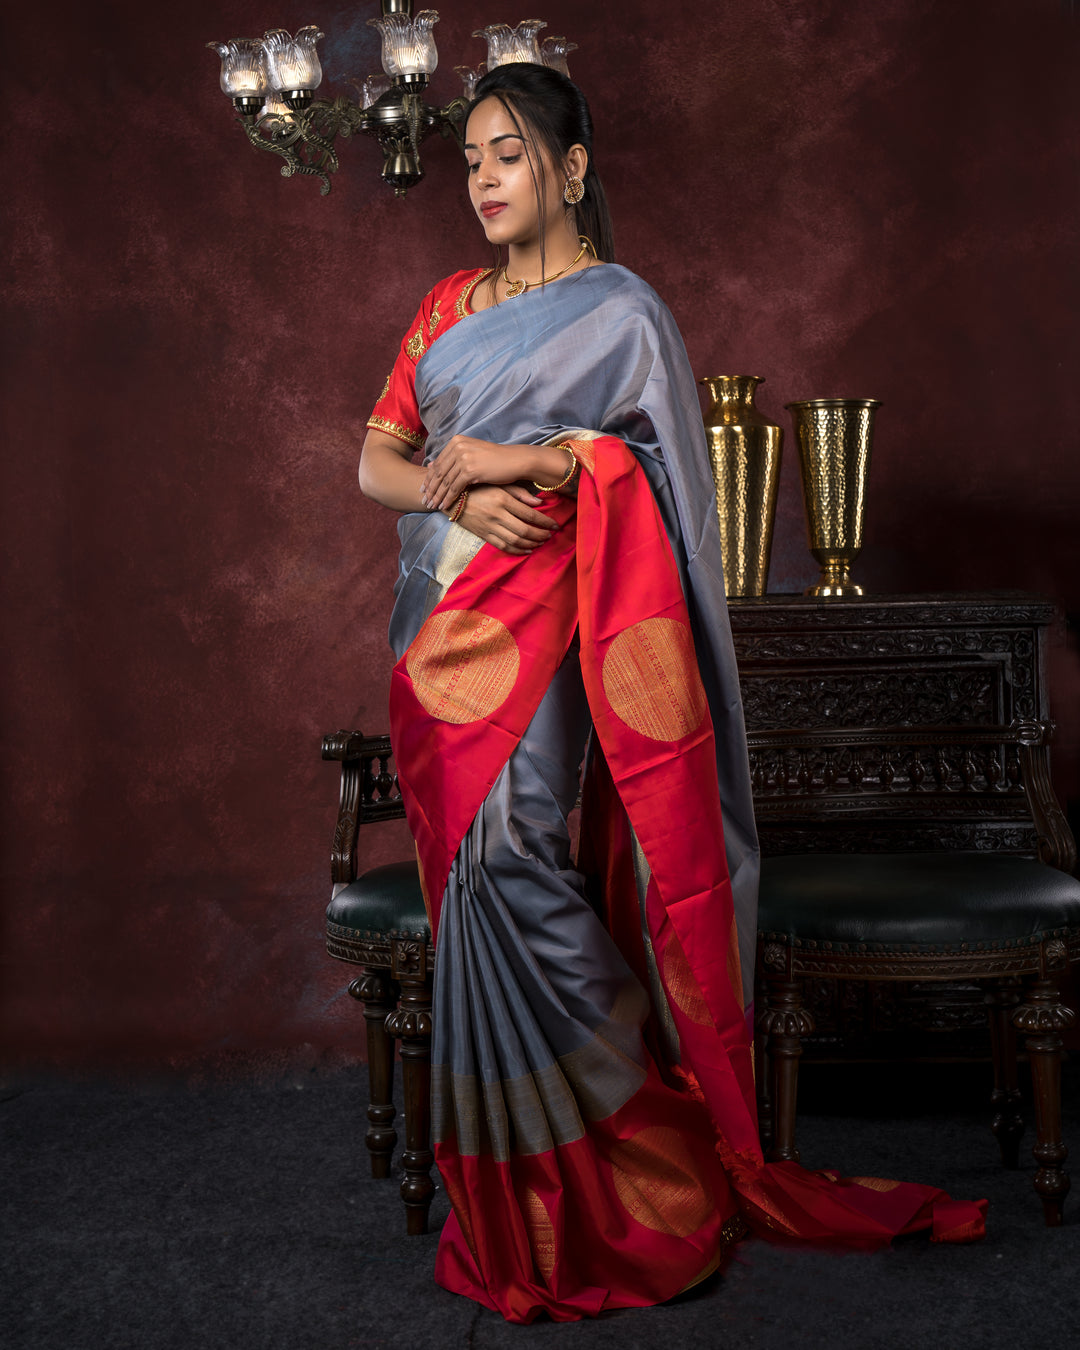 Unfolding the Saree Saga: How Gen Z is Draping Tradition in Trend